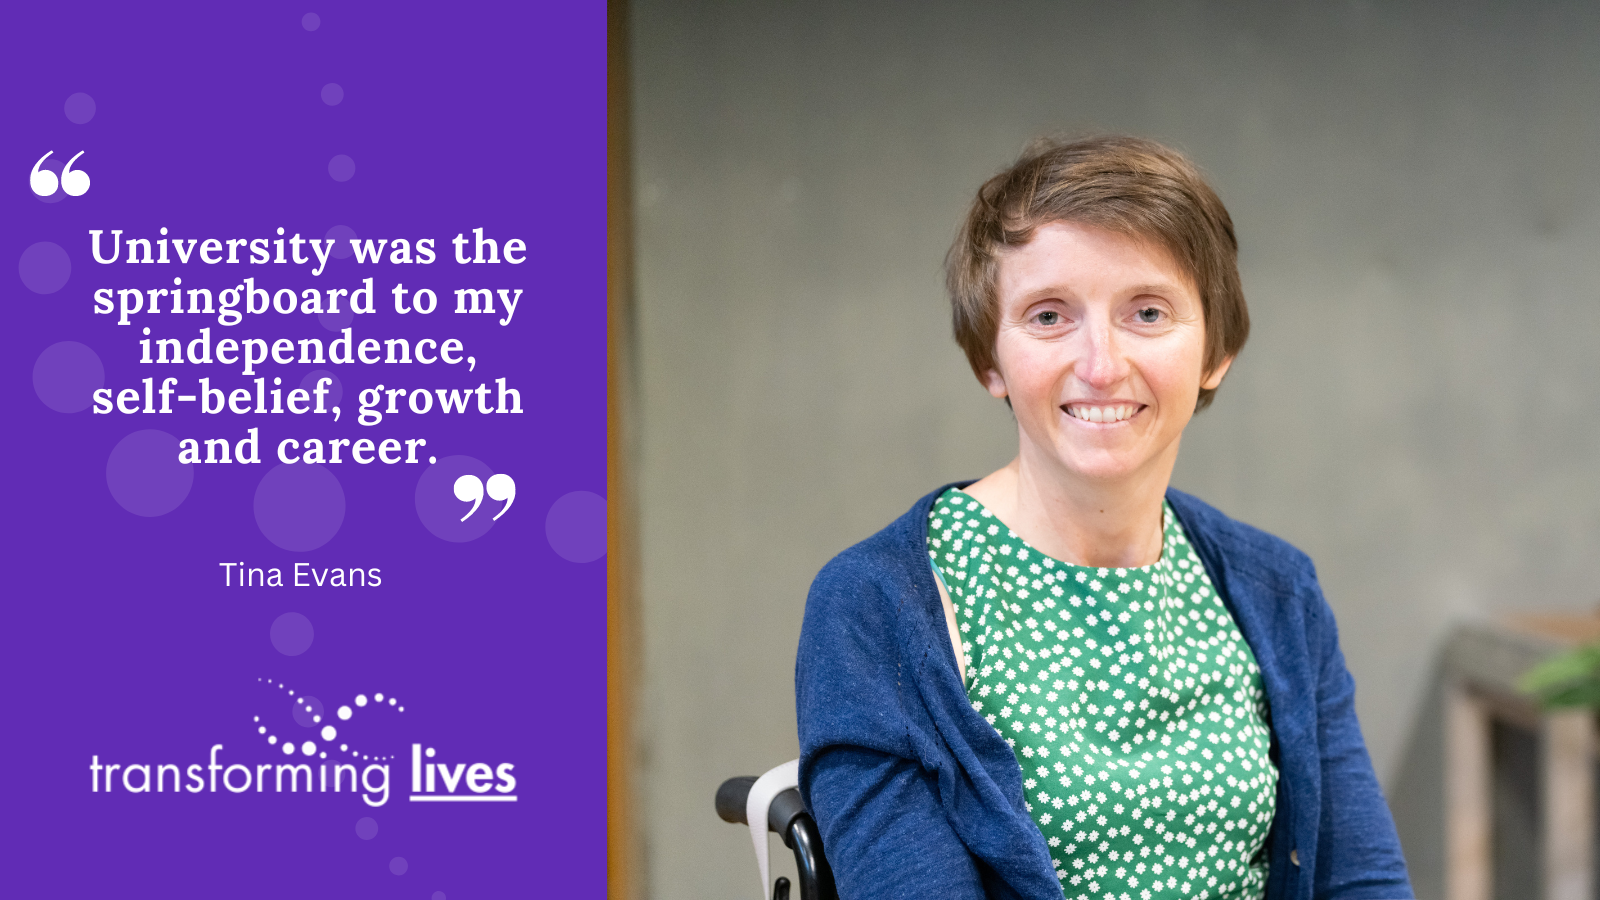 "University was the springboard to my independence, self belief, growth and career. It is an important part of my life.”